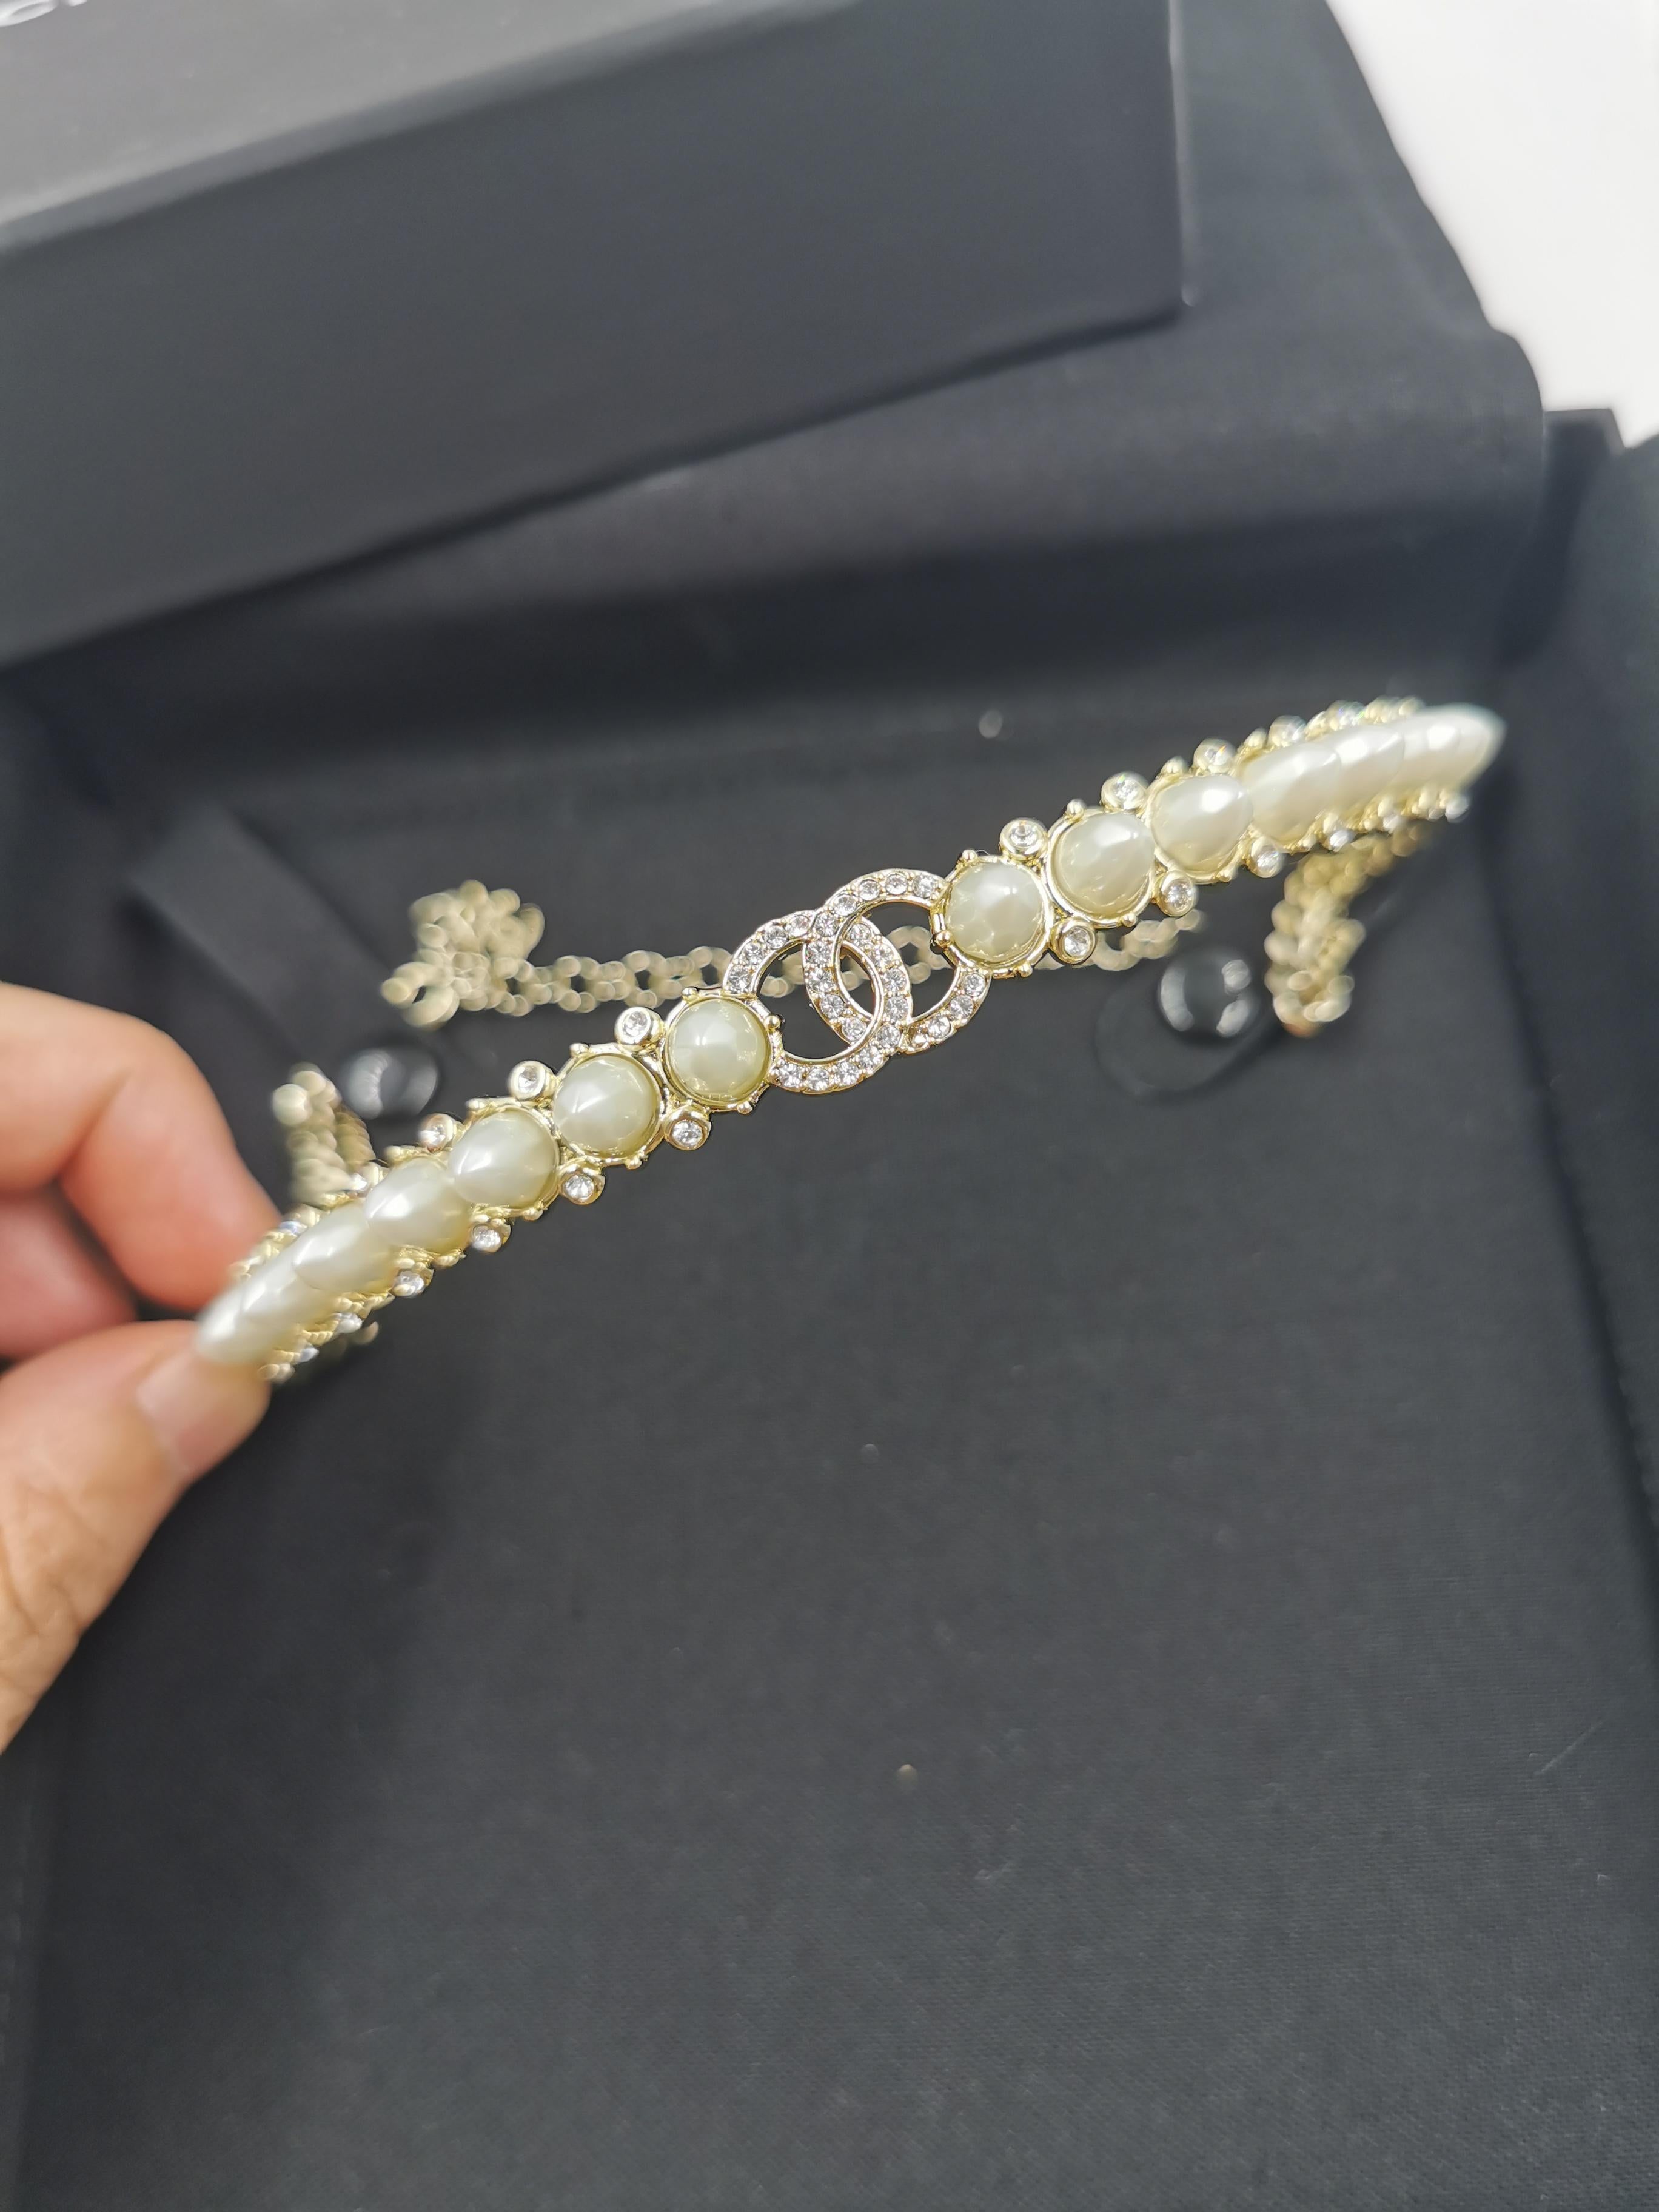 CHANEL 2021 Interlocking Choker.

Feature
Material: Metal
Color: Gold
Condition: Excellent, with one missing rhinestones
Period: 2021
Place of Origin: France